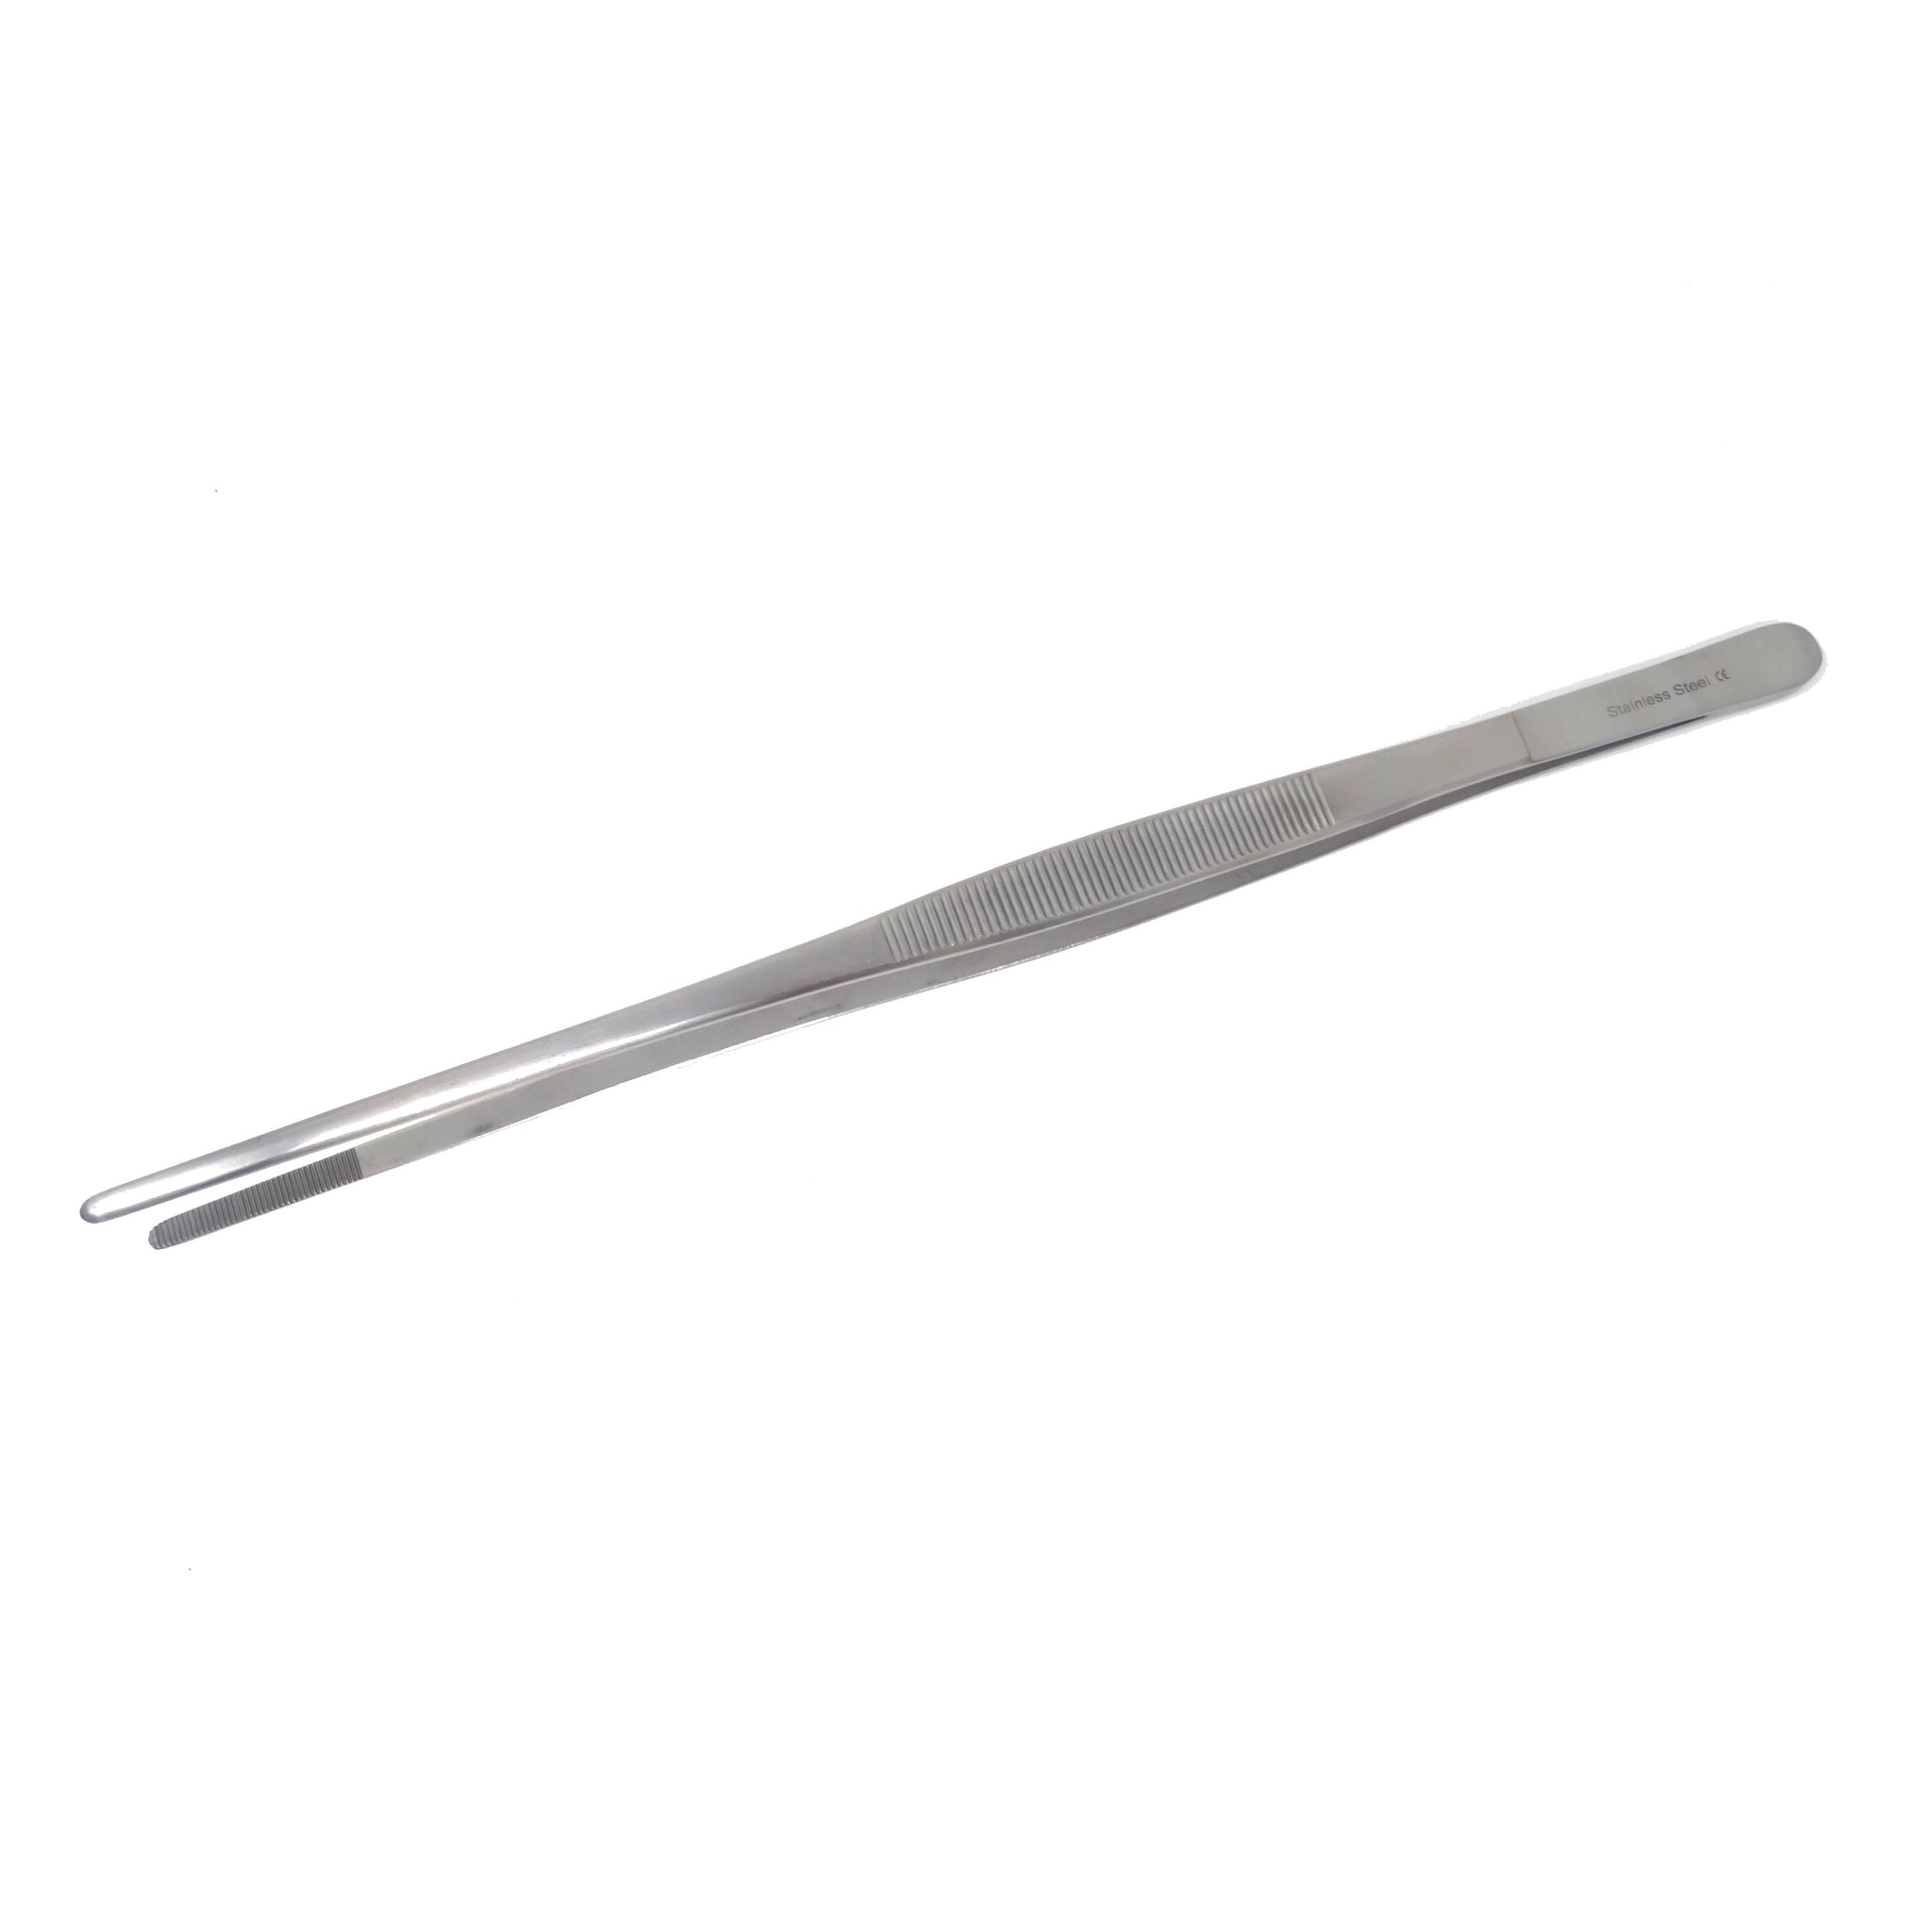 Stainless Steel Kitchen Tweezers Straight Serrated Tips 12 Large